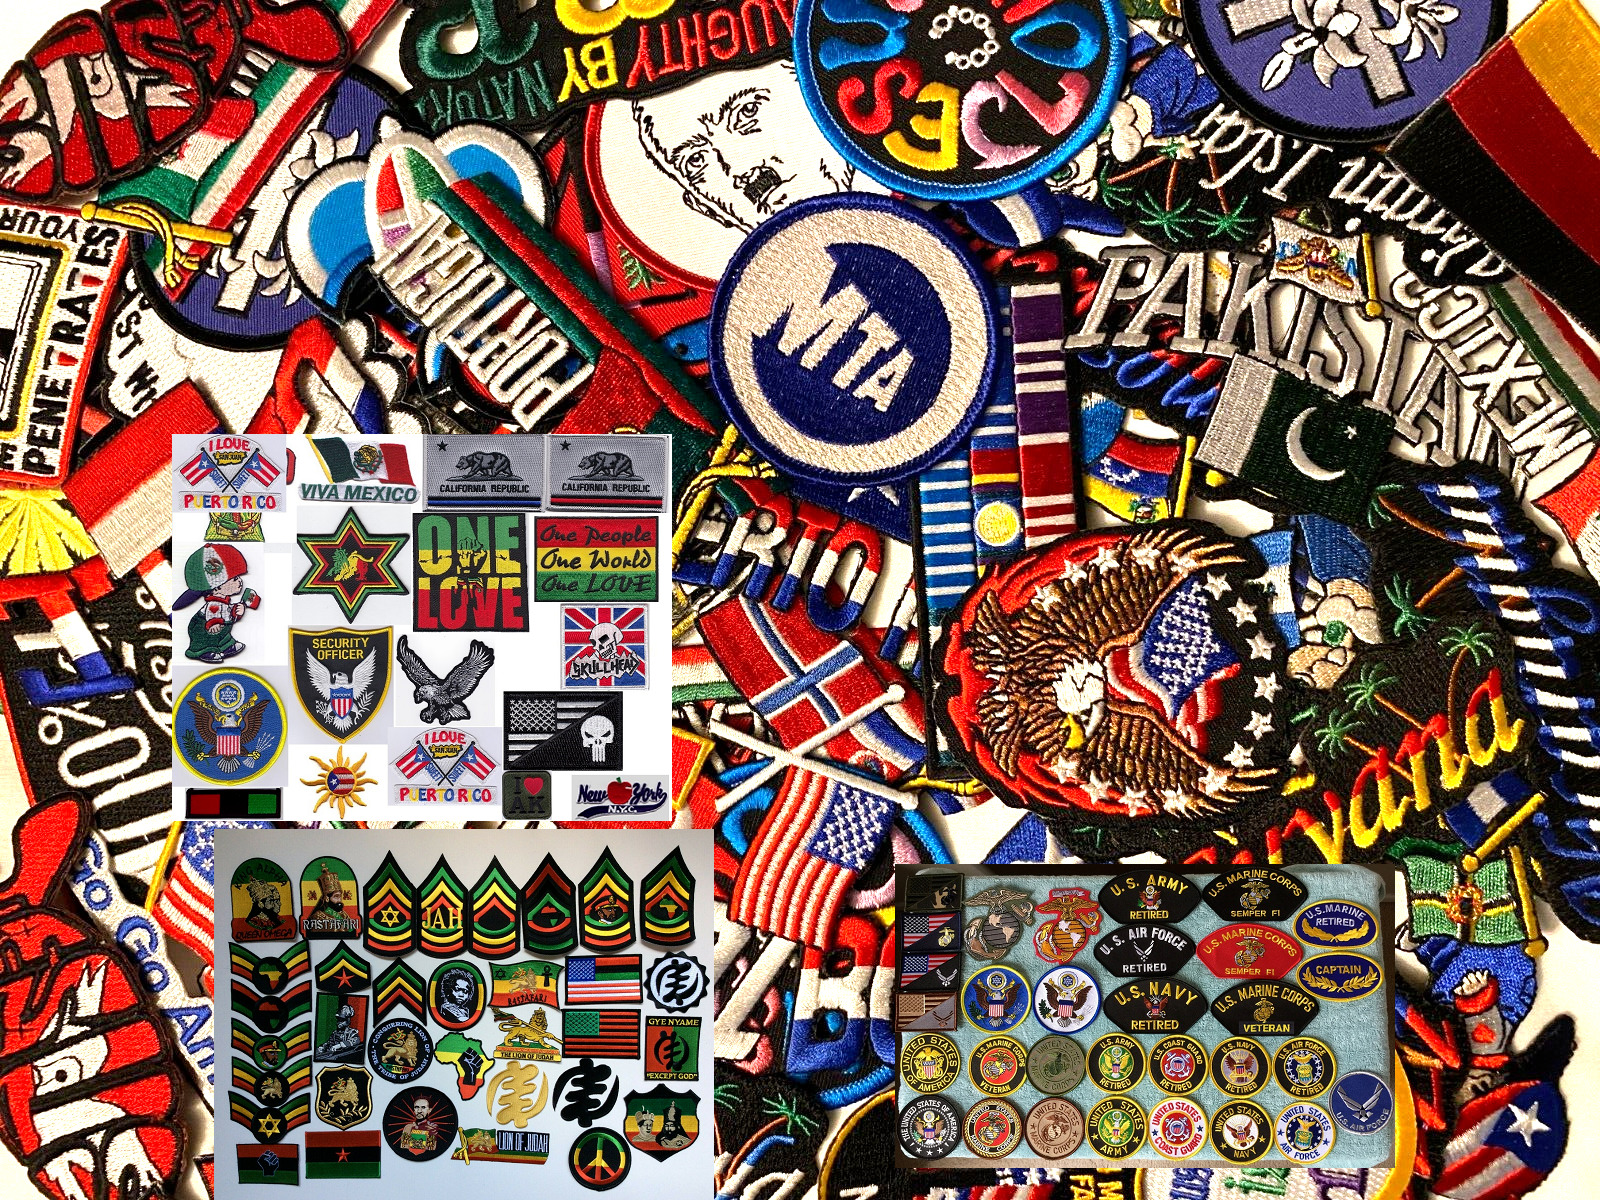 50pcs/lot Random Mix High quality Sew-on Iron-on Embroidered Patches